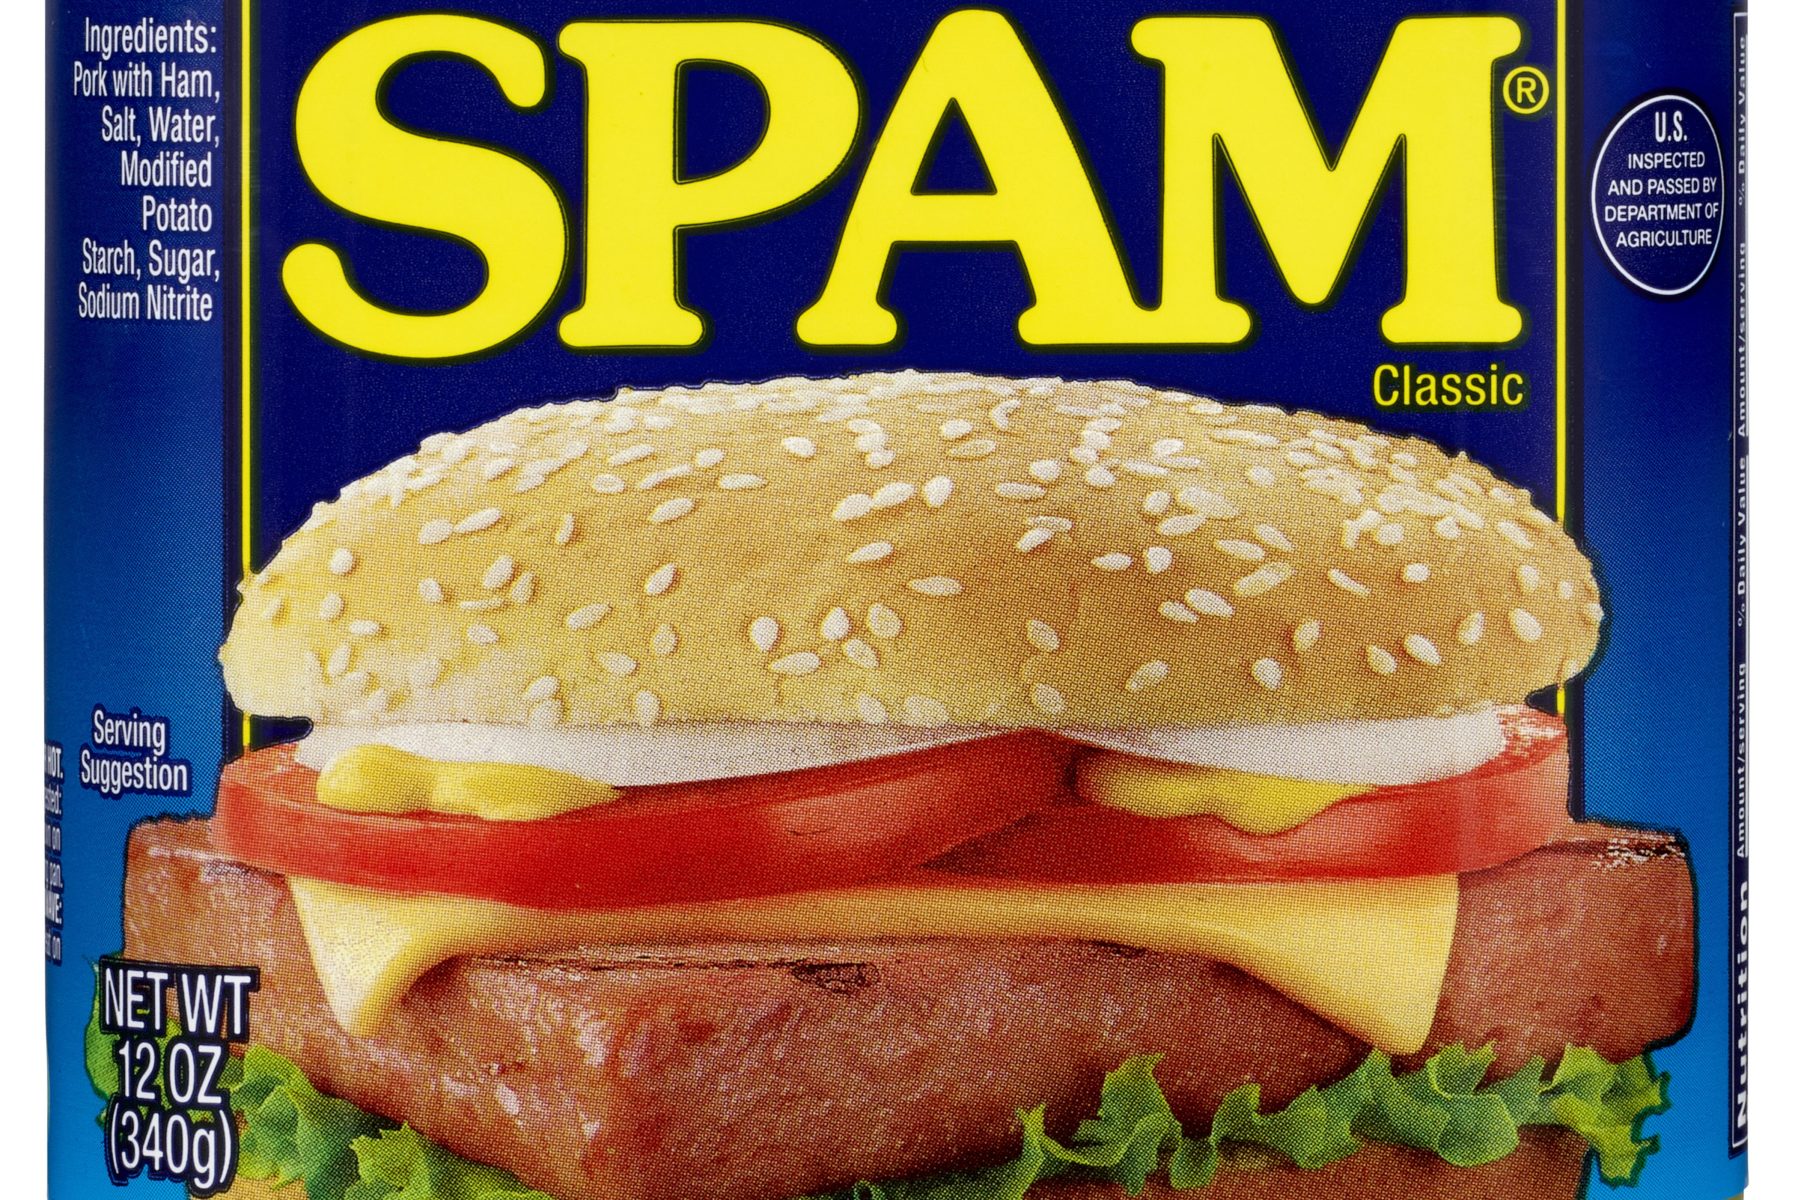 <p>First introduced 85 years ago today, on July 5, 1937, the first can of Hormel Foods Corporation’s <a href="https://www.spam.com/">Spam</a> contained just six ingredients: pork with ham, salt, water, potato starch, sugar and sodium nitrite. Named by the brother of a Hormel Foods vice president, Ken Daigneau (who received $100 for his troubles), Spam has sold more than nine billion units across 48 countries and is now available in 11 different varieties. To help put the history of the little blue can, which is the inspiration for an annual Hawaiian street festival, into perspective, InsideHook secured some images from Hormel’s archives and spoke with Group Brand Manager Brian Lillis about ‘em.</p>